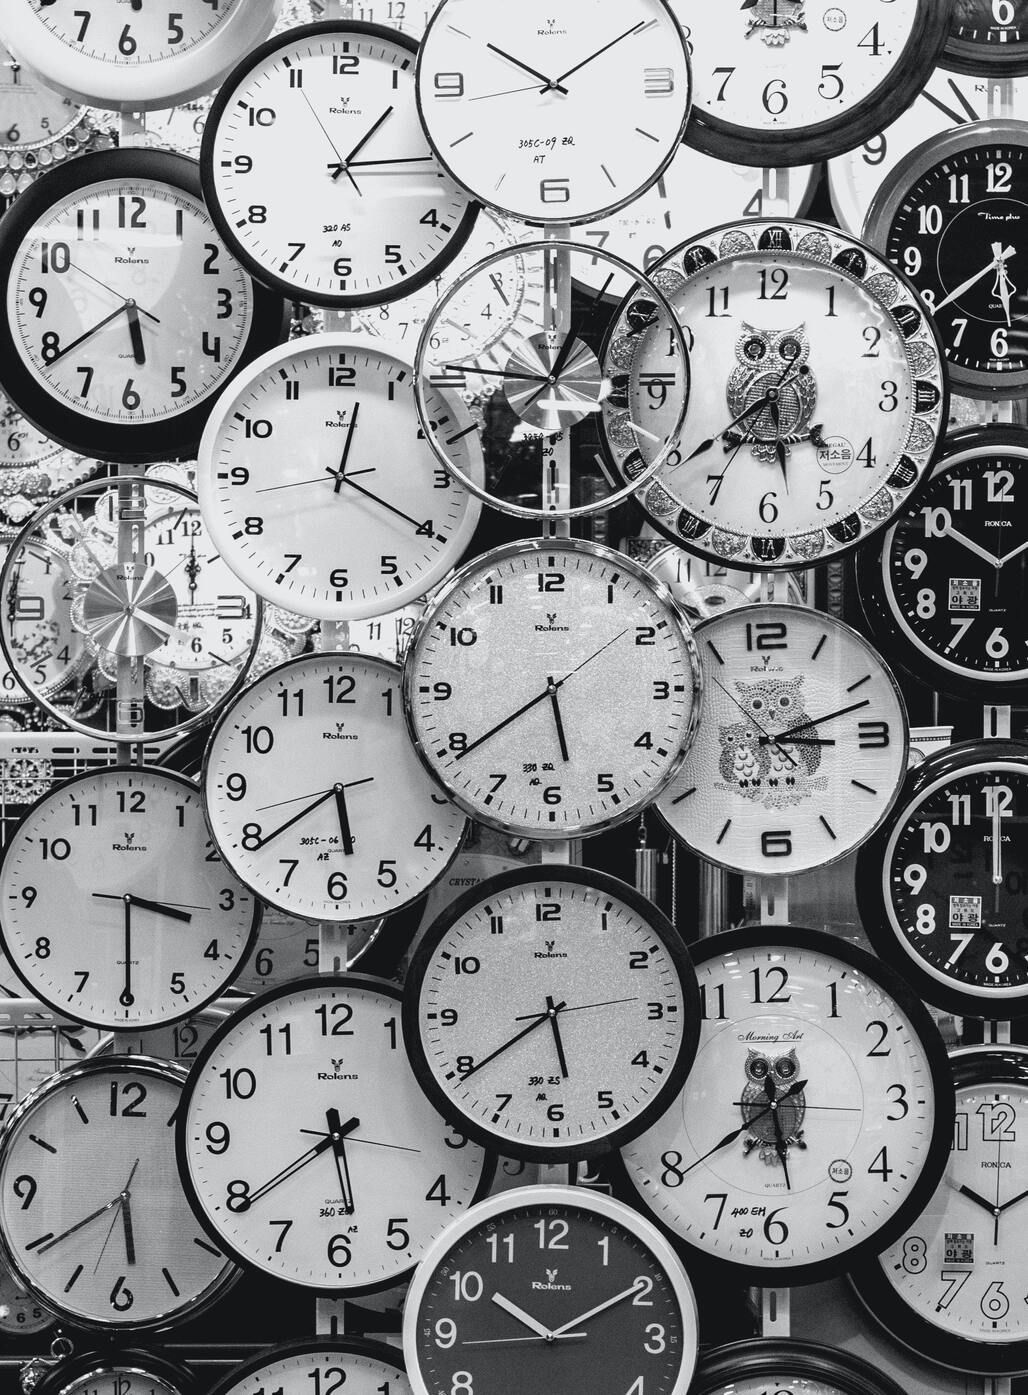 Wide array of black and white clocks indicating time and urgent tasks